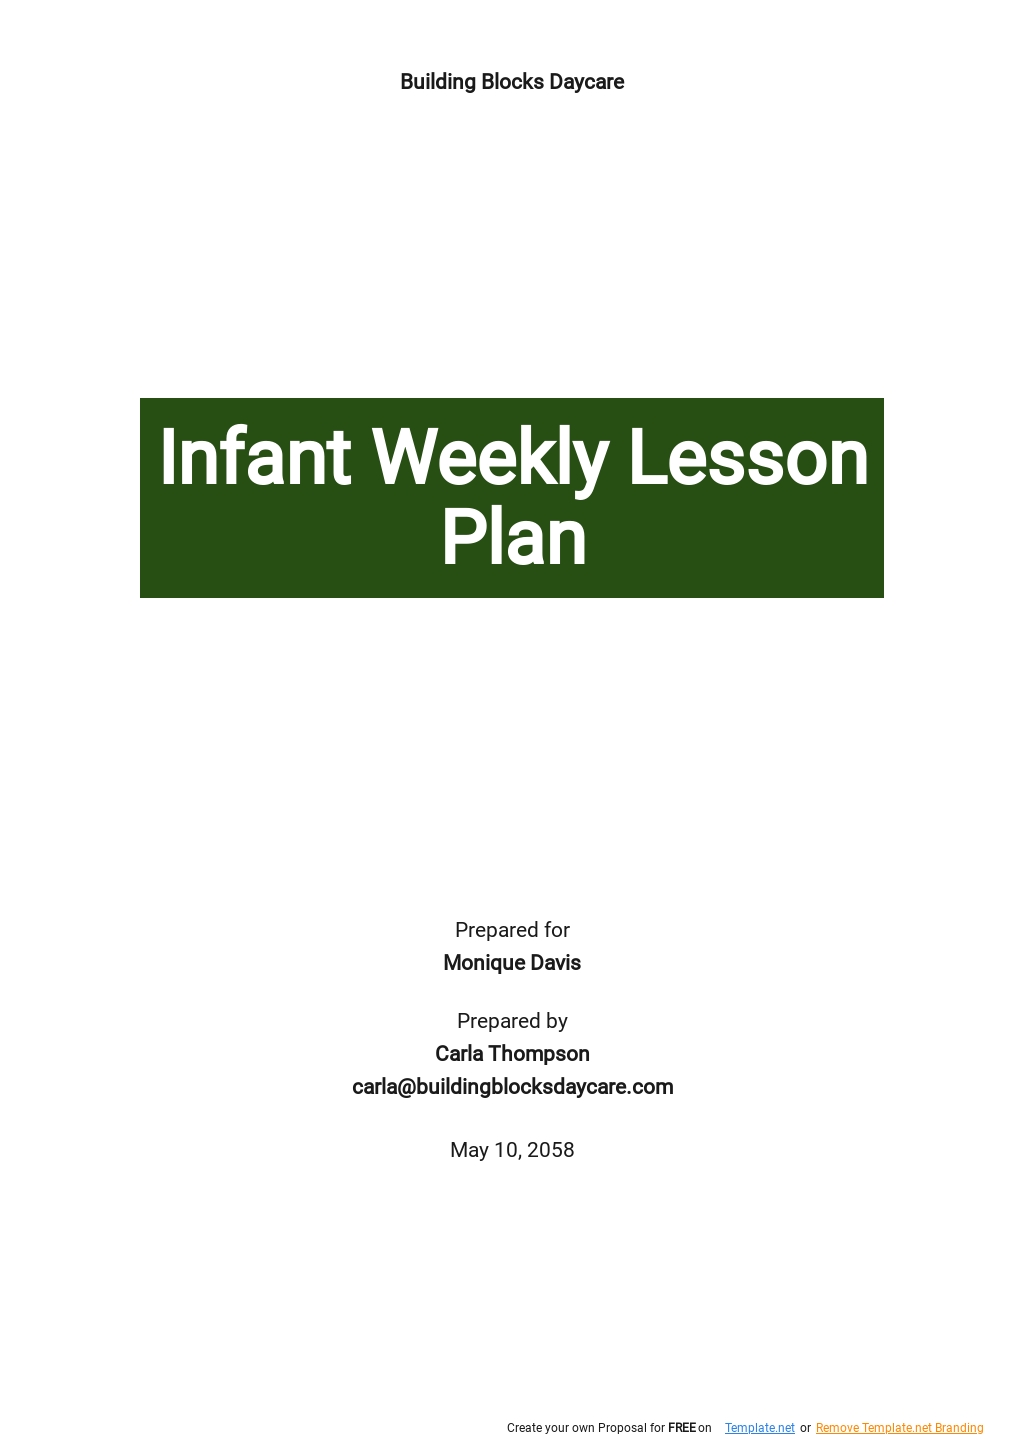 Infant Weekly Lesson Plan Template.jpe